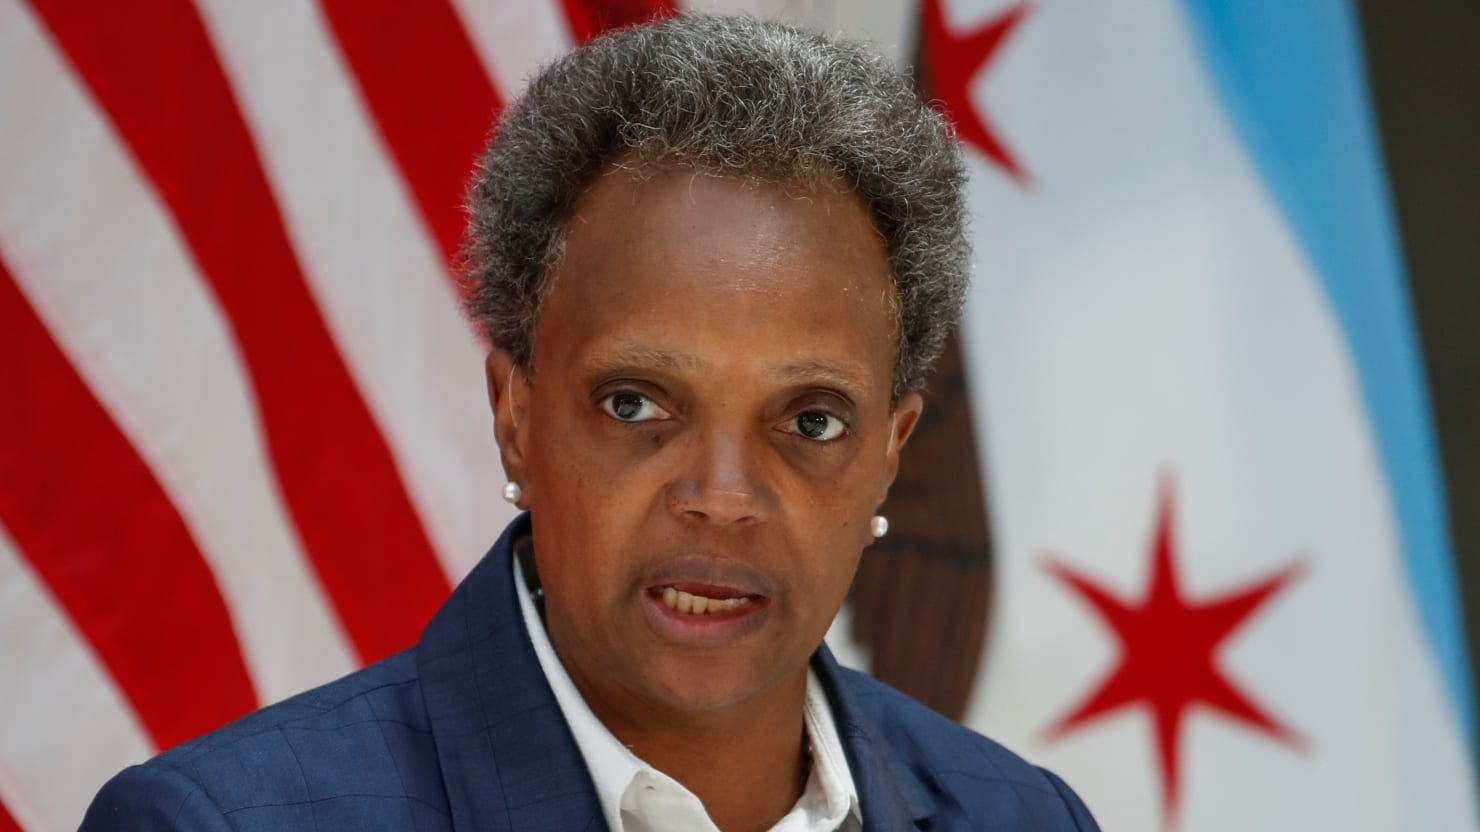 Lightfoot failed to scrape into Round 2 of Chicago’s very disgusting mayoral race.